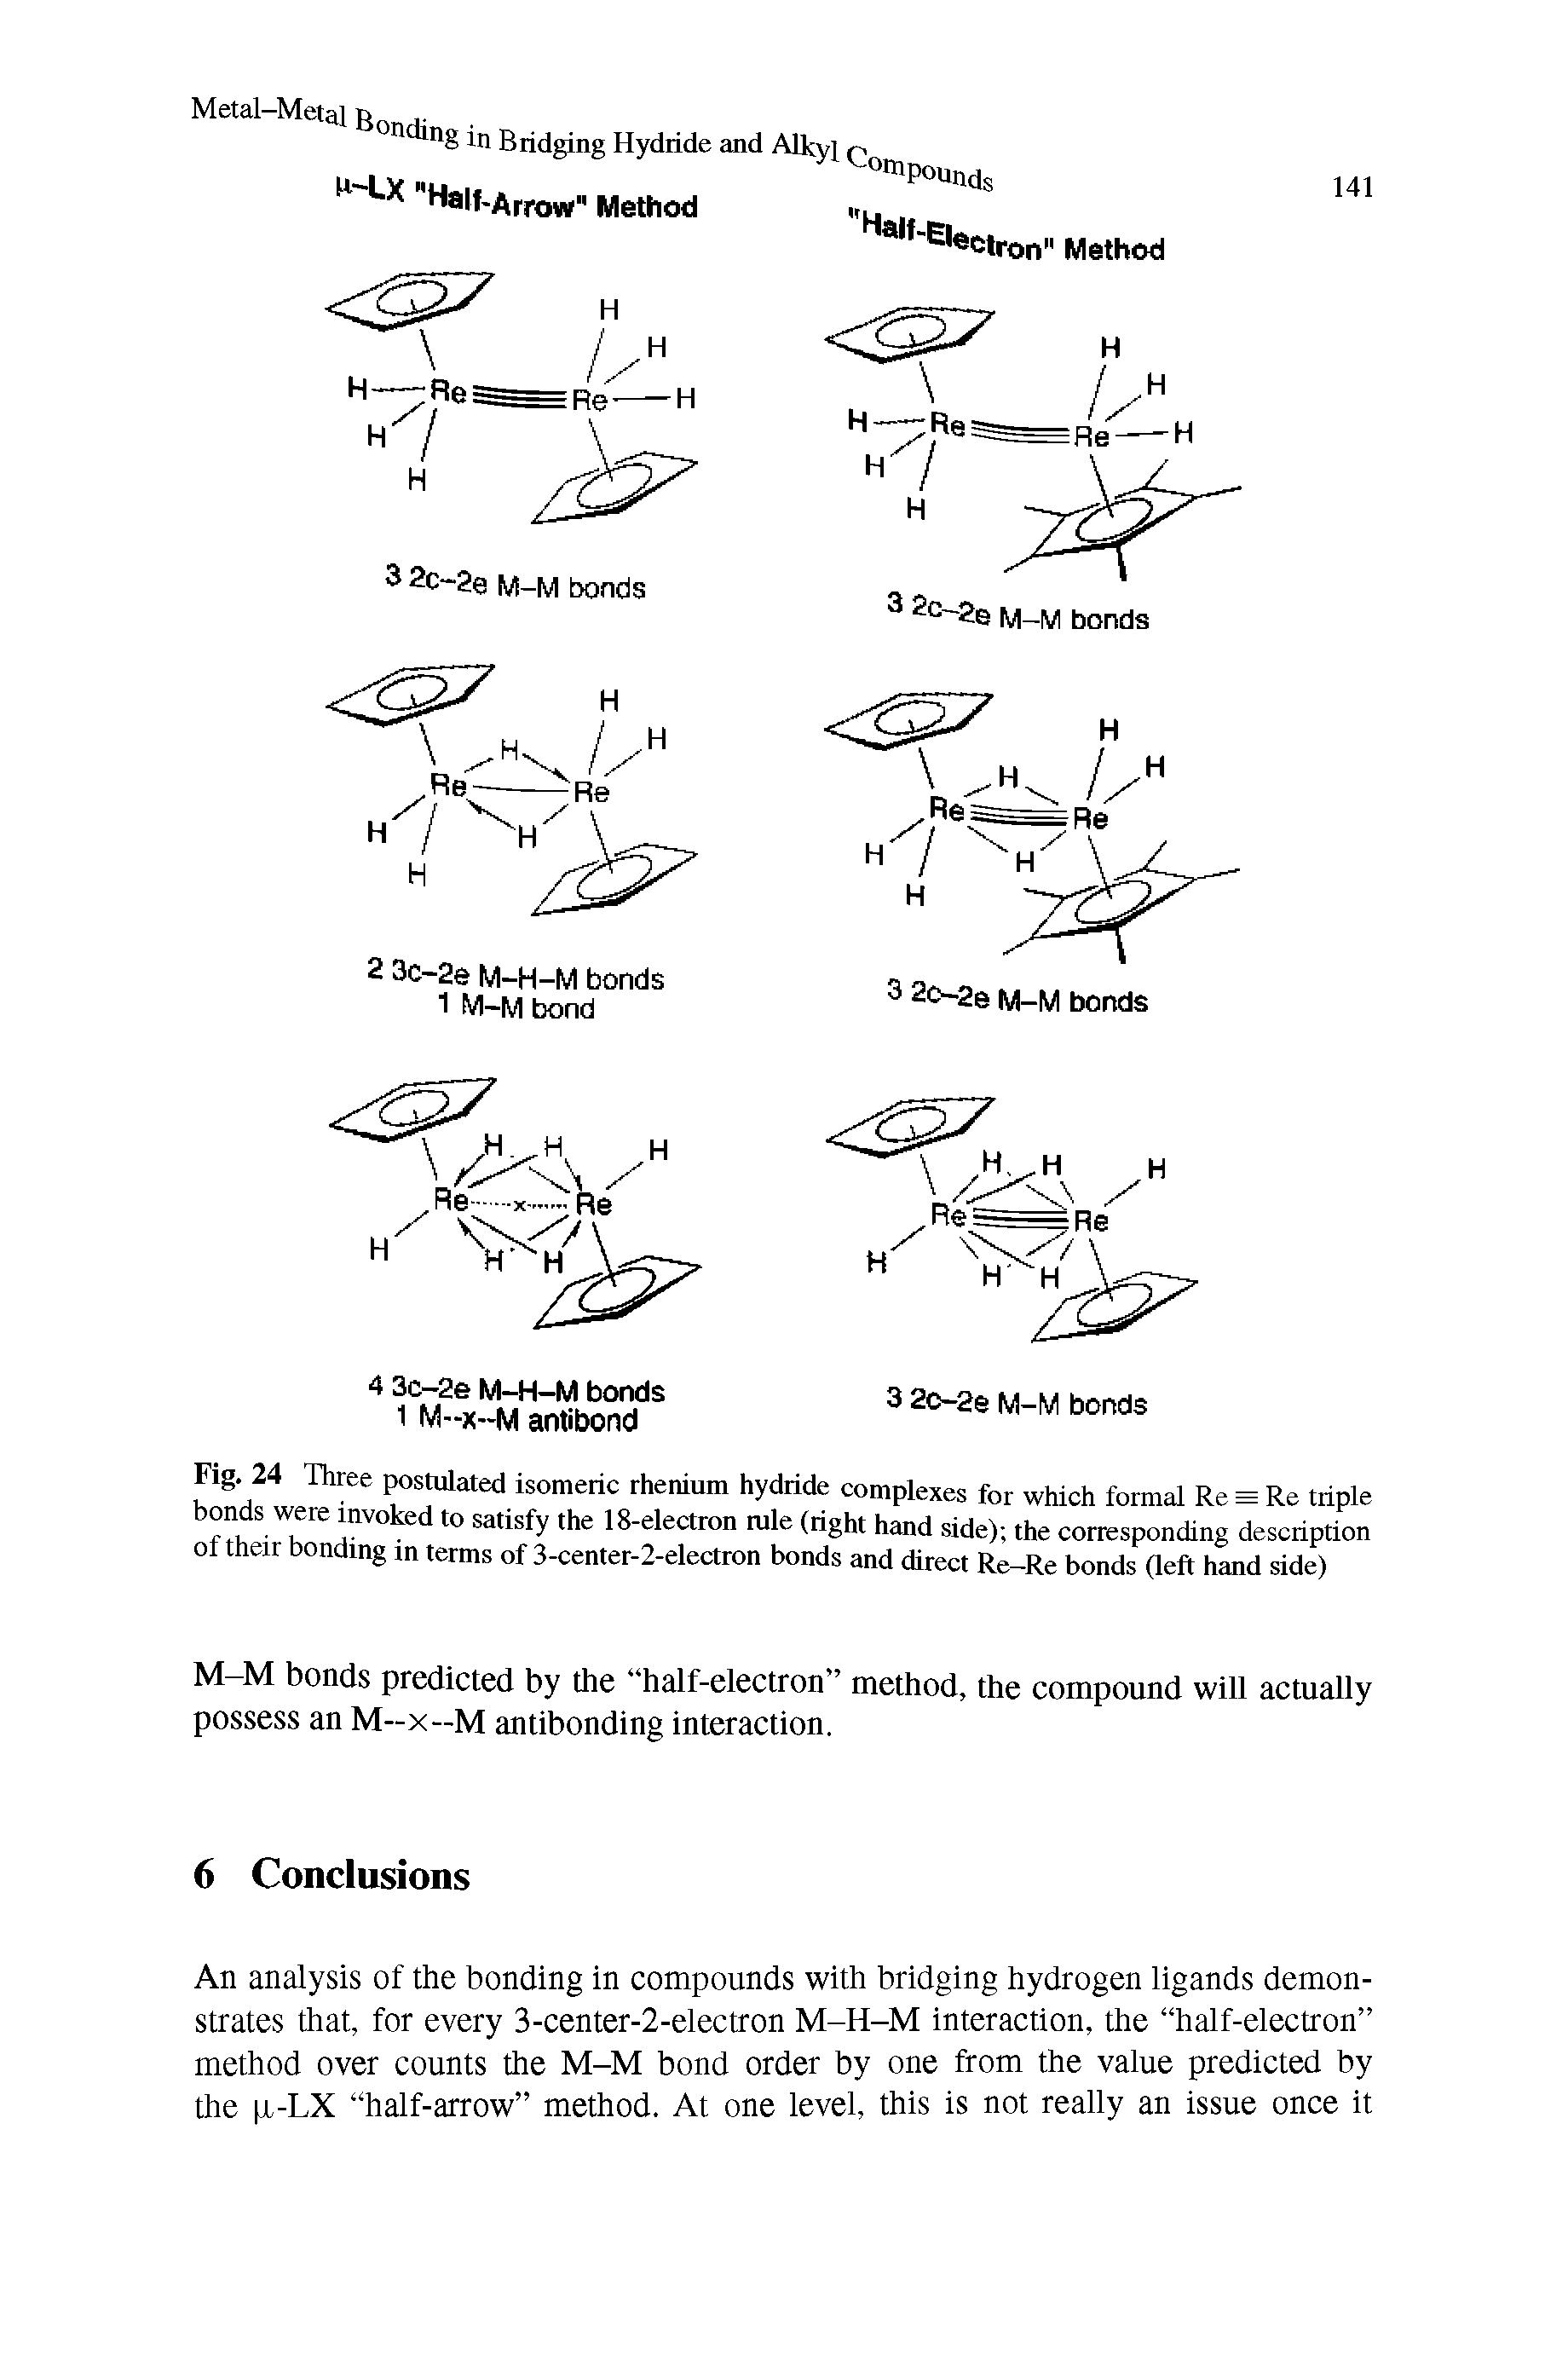 Fig. 24 Three postulated isomeric rhenium hydride complexes for which formal Re s Re triple bonds were invoked to satisfy the 18-electron nile (right hand side) the corresponding description of their bonding in terms of 3-center-2-electron bonds and direct Re-Re bonds (left hand side)...